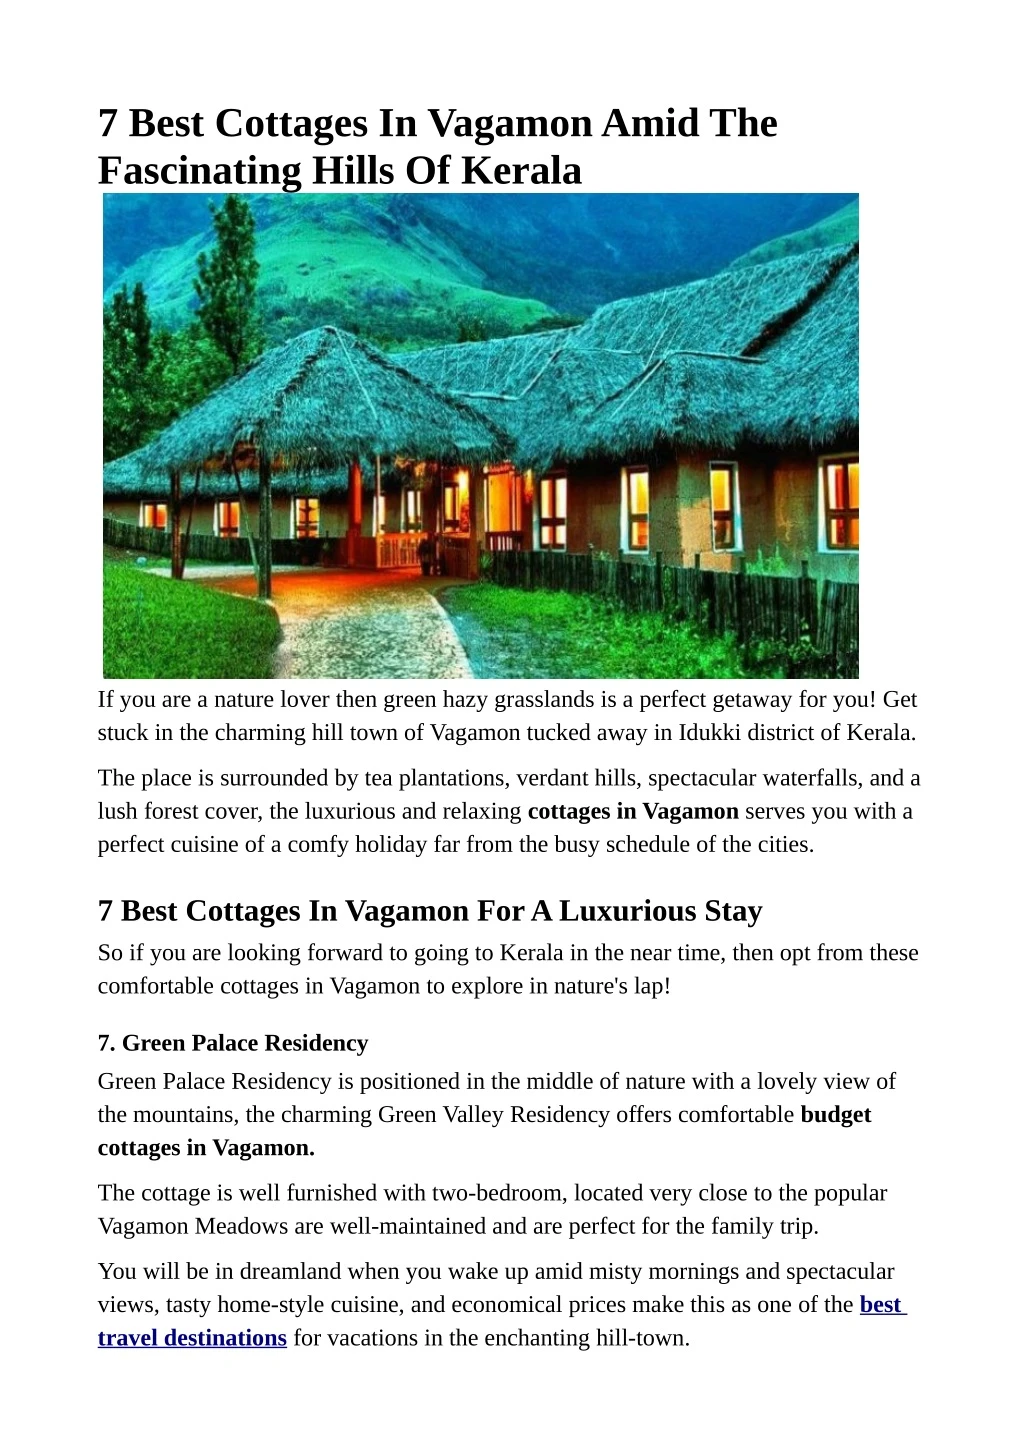 7 best cottages in vagamon amid the fascinating